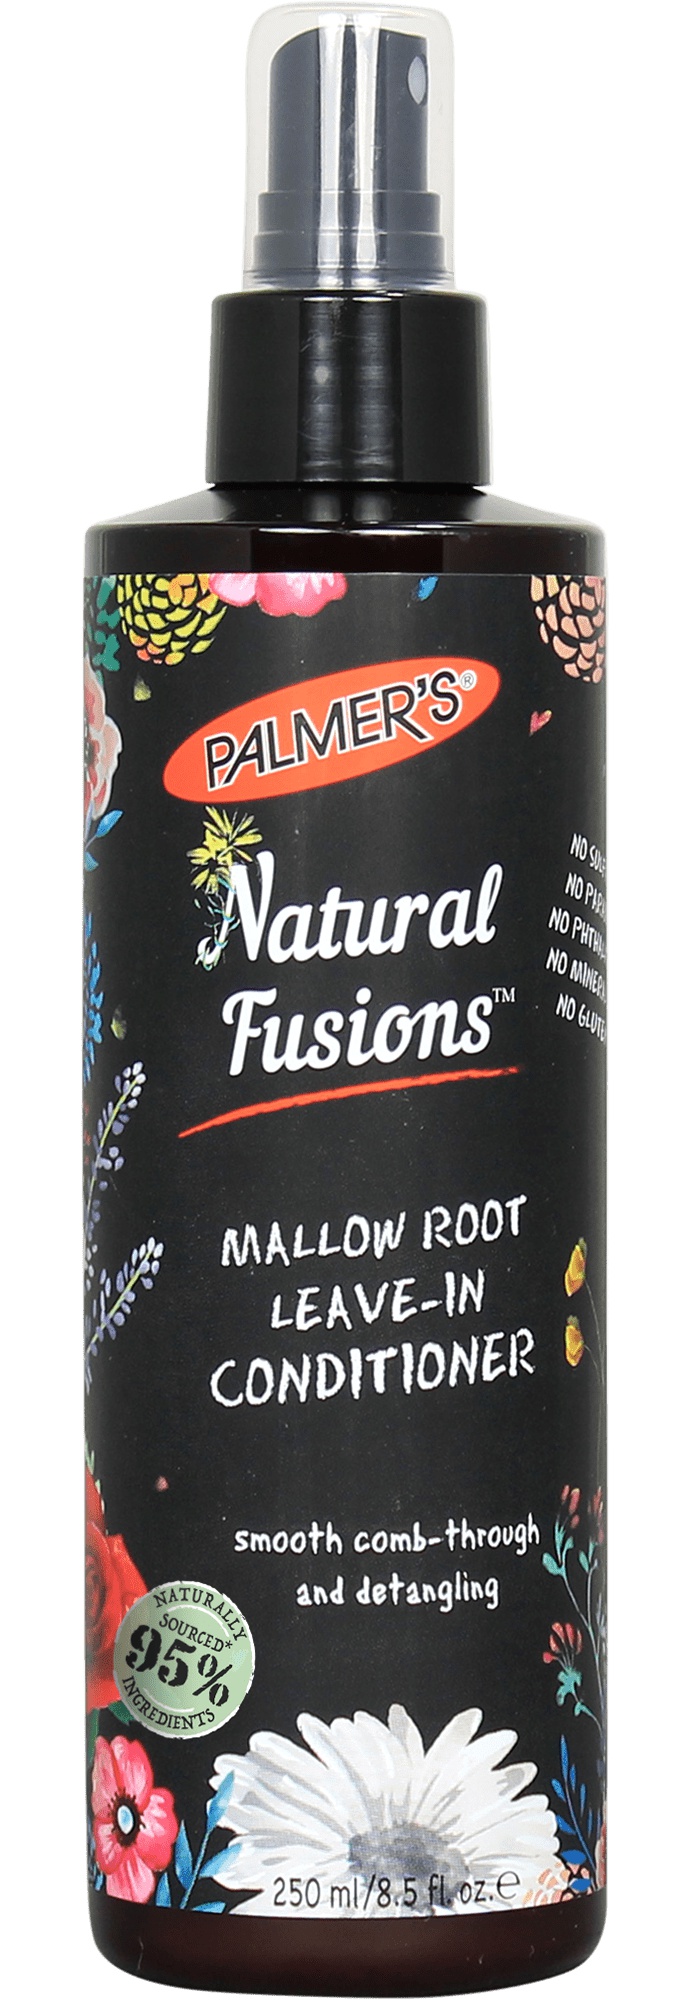 Palmer's Natural Fusions Nourishing Leave-in Conditioner With Mallow Root